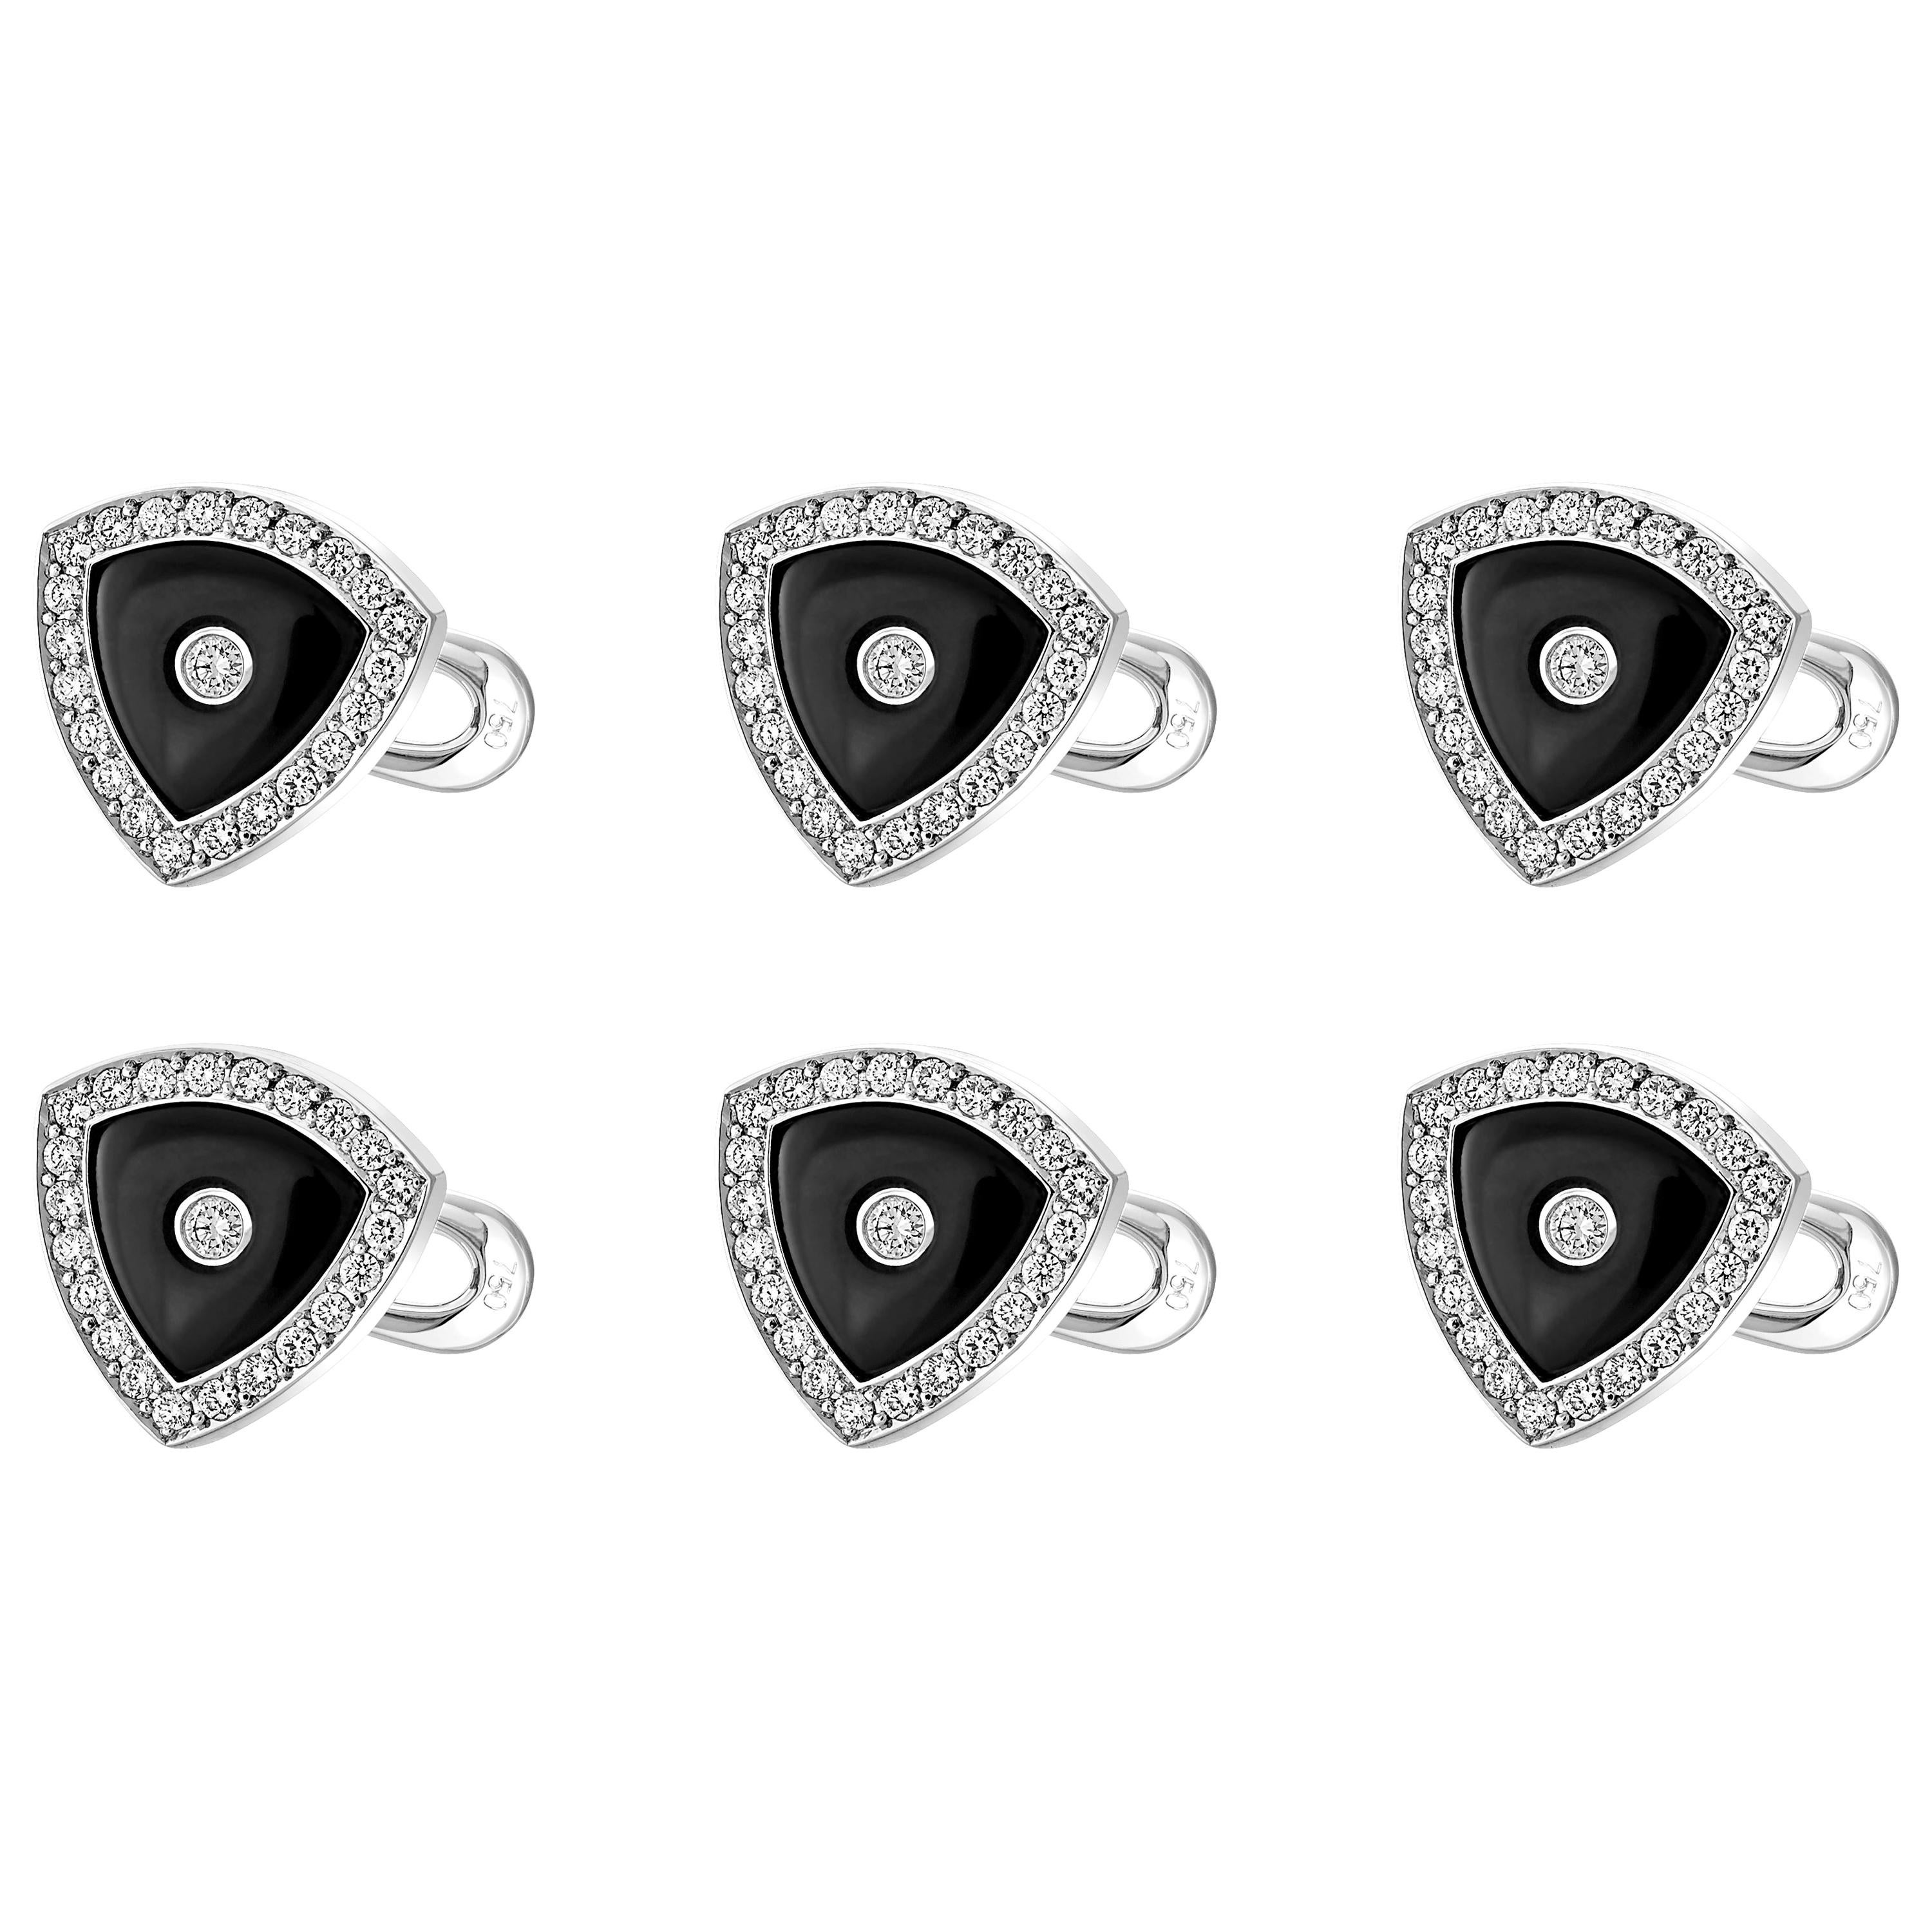 5.05 Carat Black Onyx and 1.13 Carat Diamond Shirt Buttons in 6-Piece Set For Sale